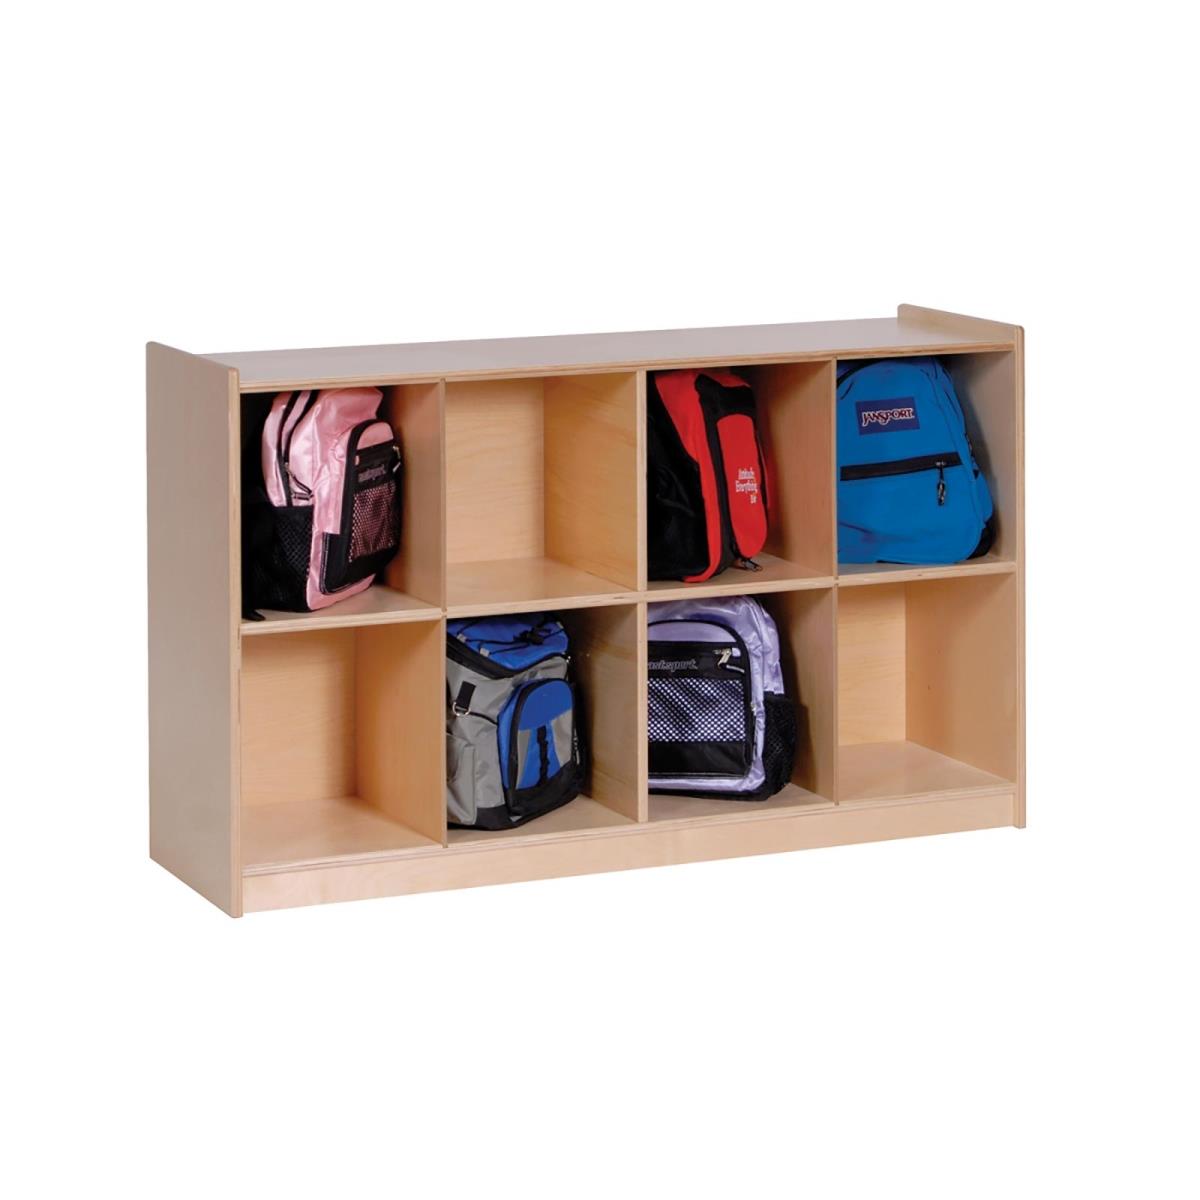 Angeles Ang1413 Brich 8-cubby Storage - Uv Finish - 14 X 29 X 47 In.